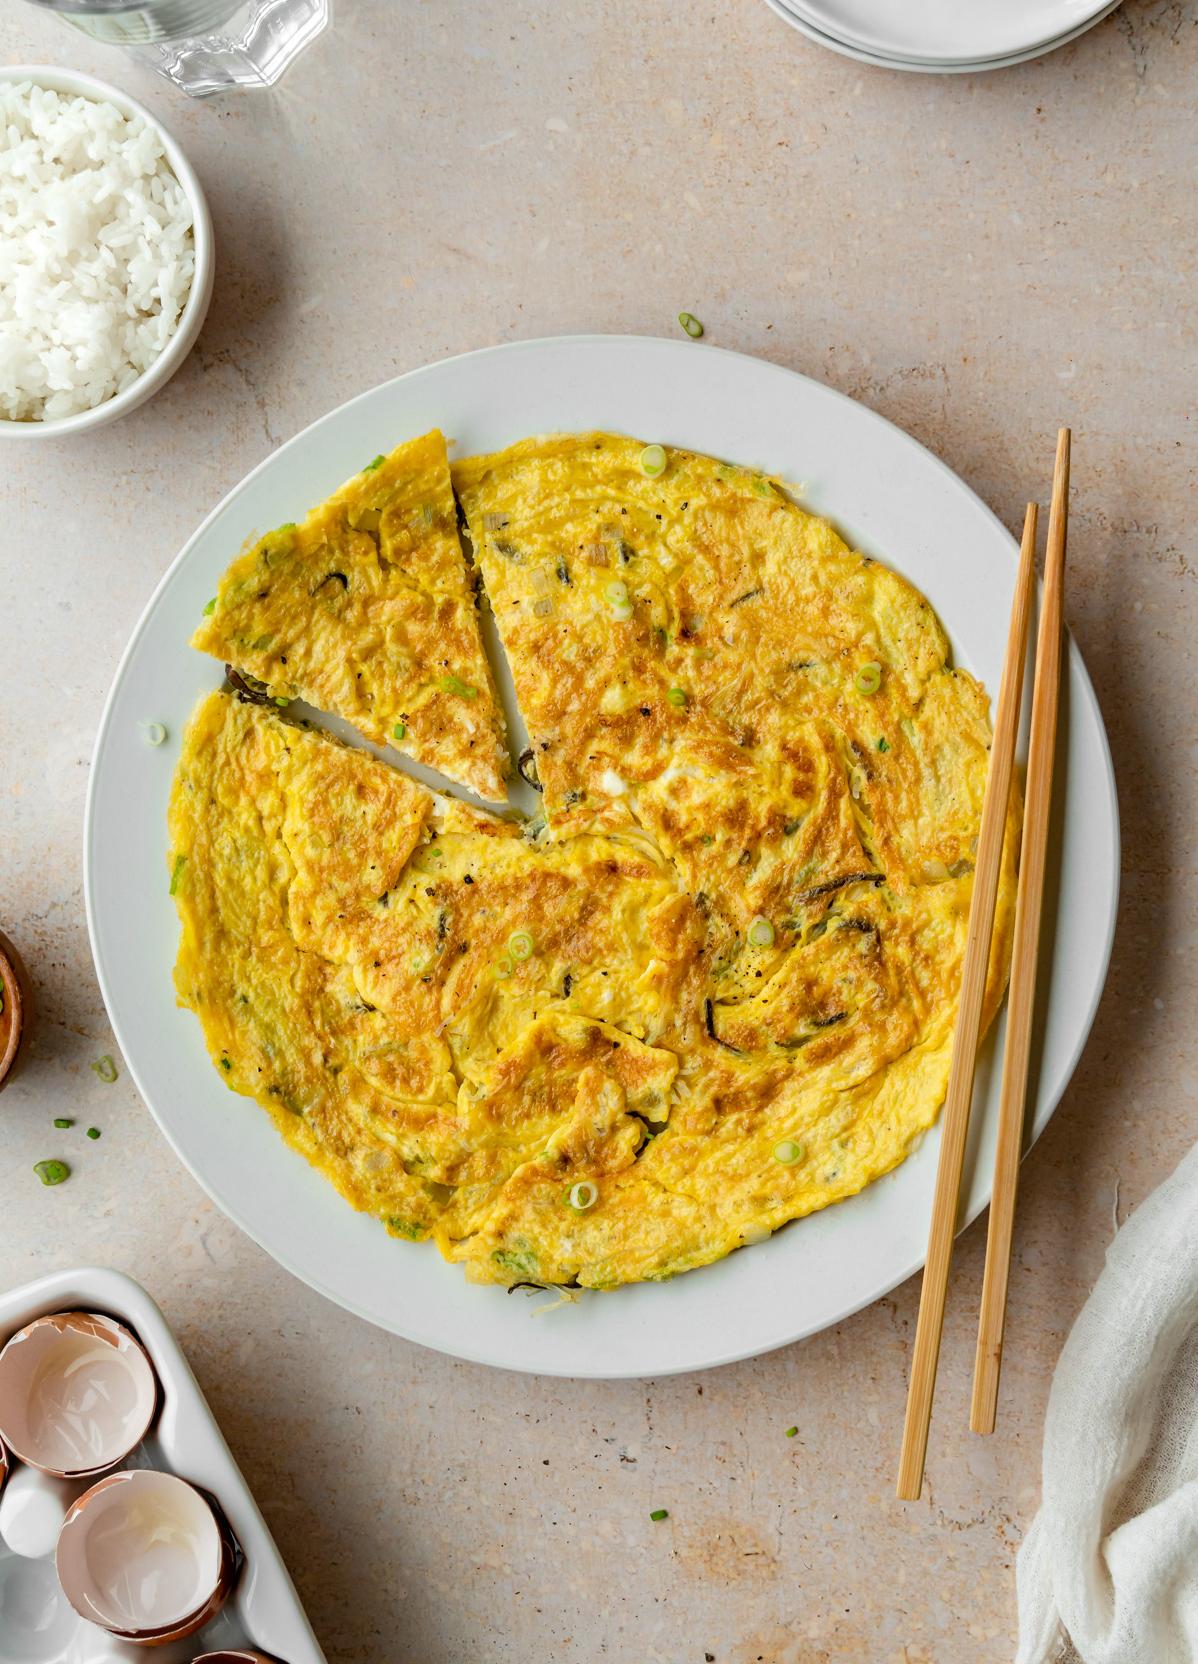  The ultimate comfort food: Vietnamese omelette!